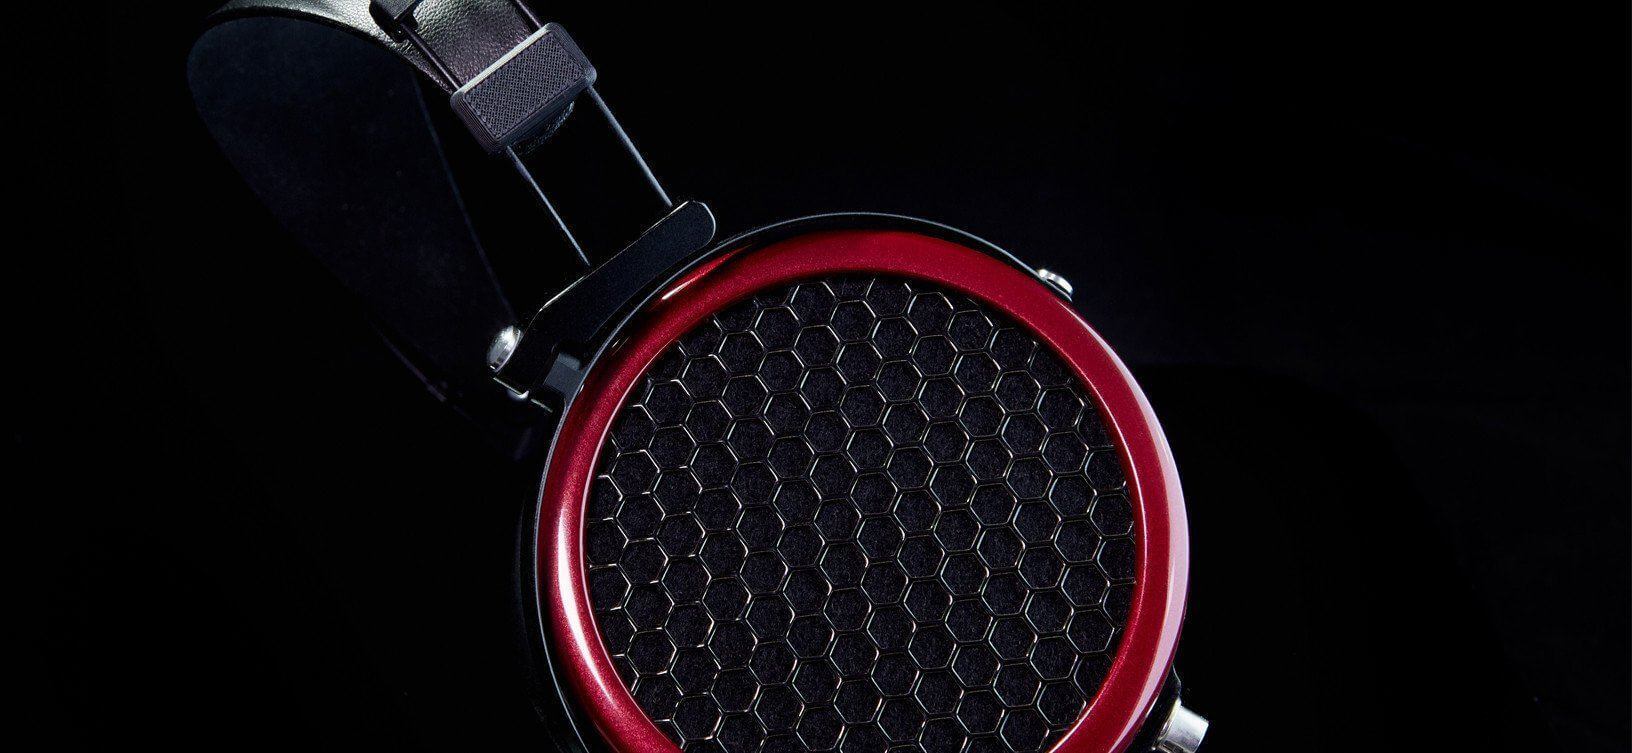 MrSpeakers Ether Headphone Review